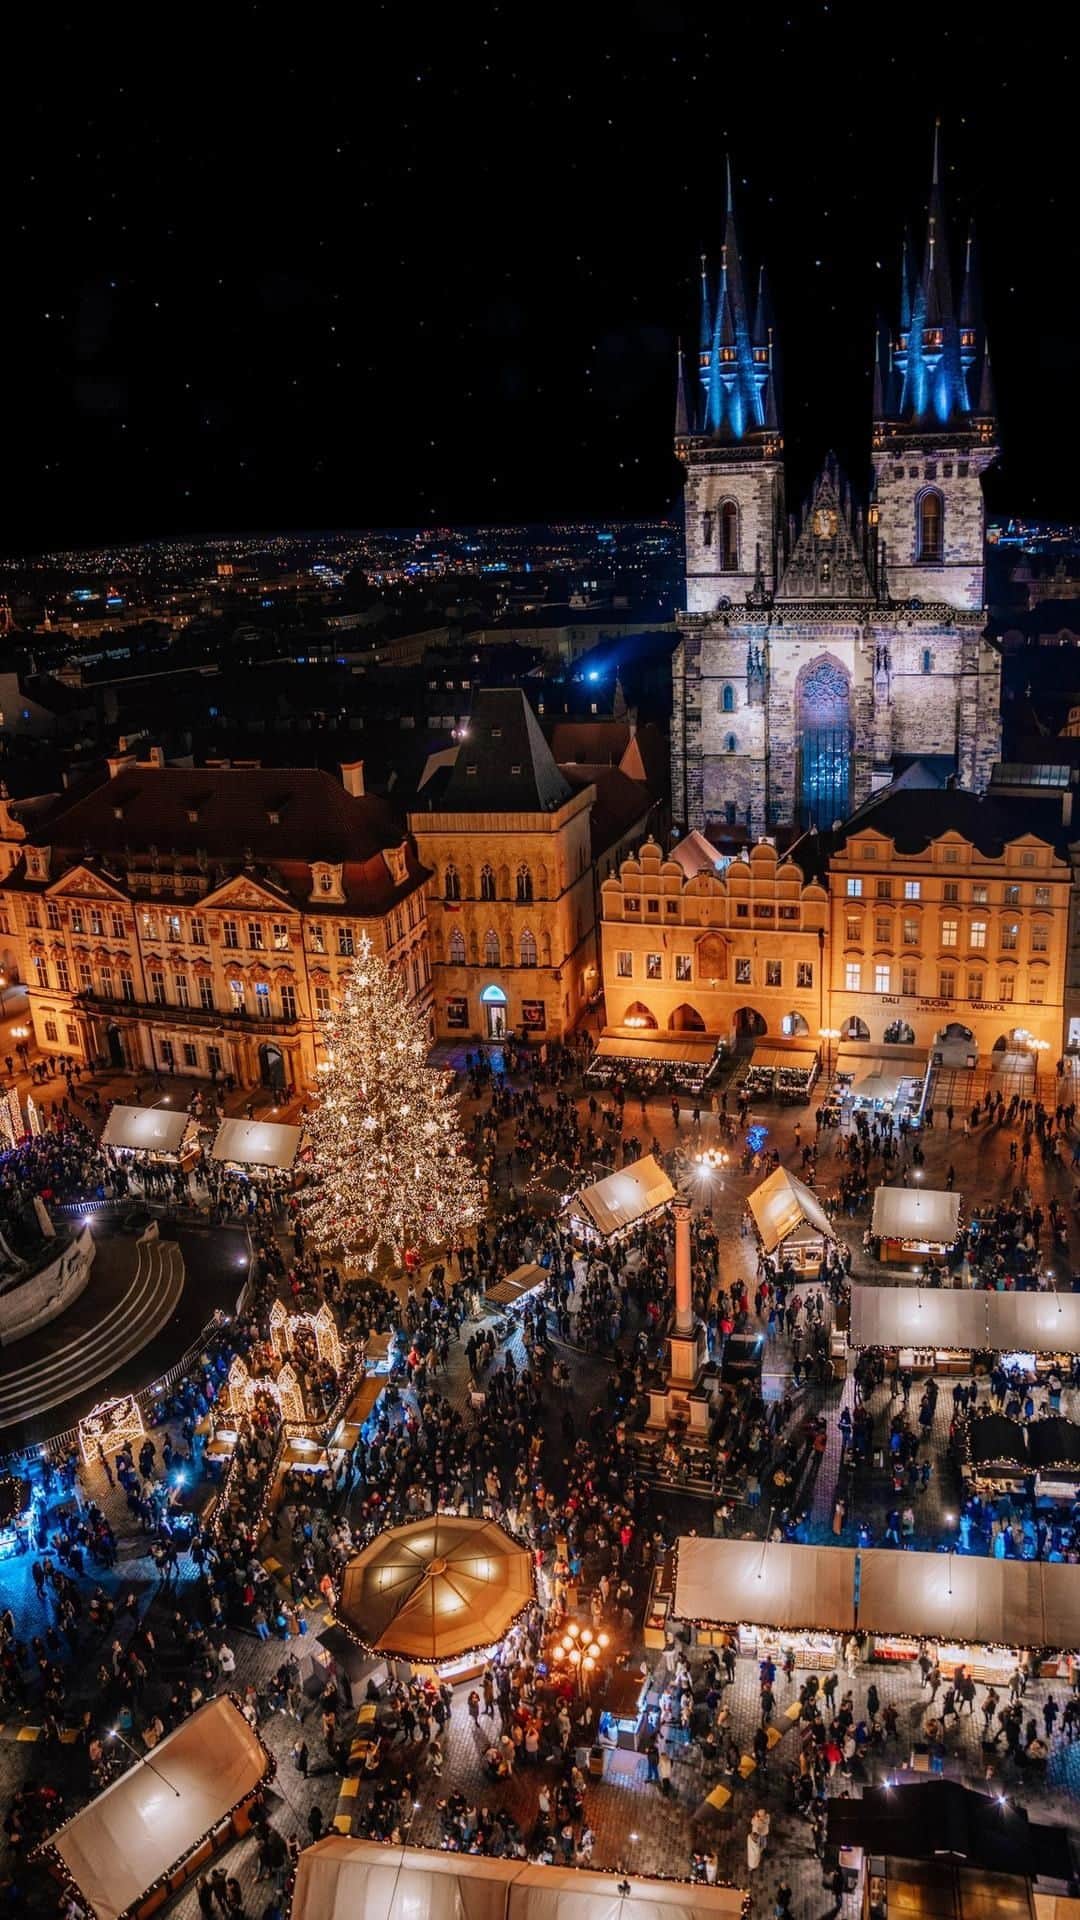 Izkizのインスタグラム：「Have you ever visited a Christmas Market? ✨🎄 We had some lovely festive times at the Christmas markets in Prague sipping mulled wine and eating chimney cakes 🍷  #Christmas #Xmas best Christmas markets, European Christmas markets #praguecityguide Prague city guide, old town Prague #christmasprague Charles Bridge #charlesbridge #europetravel #Prague #visitprague #christmasinprague #christmasineurope #christmasmarkets #bestchristmasmarkets #visitczechrepublic #czechrepublic #londonblogger,Europe travel #thingstodoinprague things to do in Prague, prague travel guide #uktravelblogger Europe city guide, uk travel bloggers #xmasinprague #xmasinprague🎄」